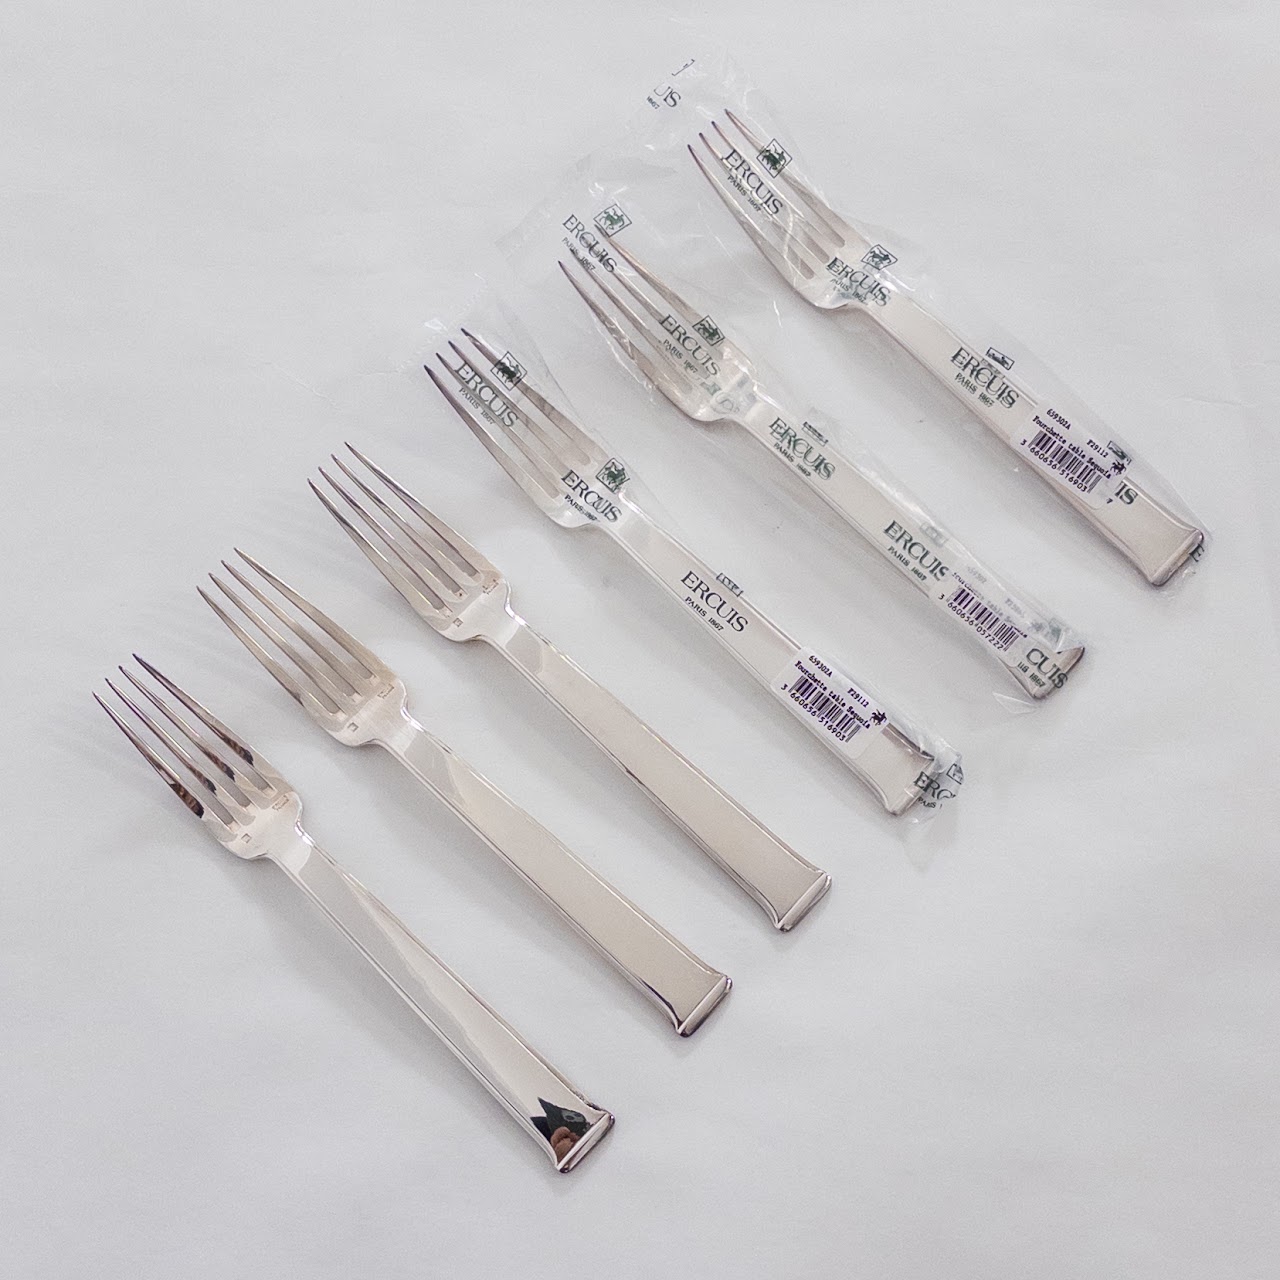 Ercuis Sequoia Silver Plated Flatware Service for Six